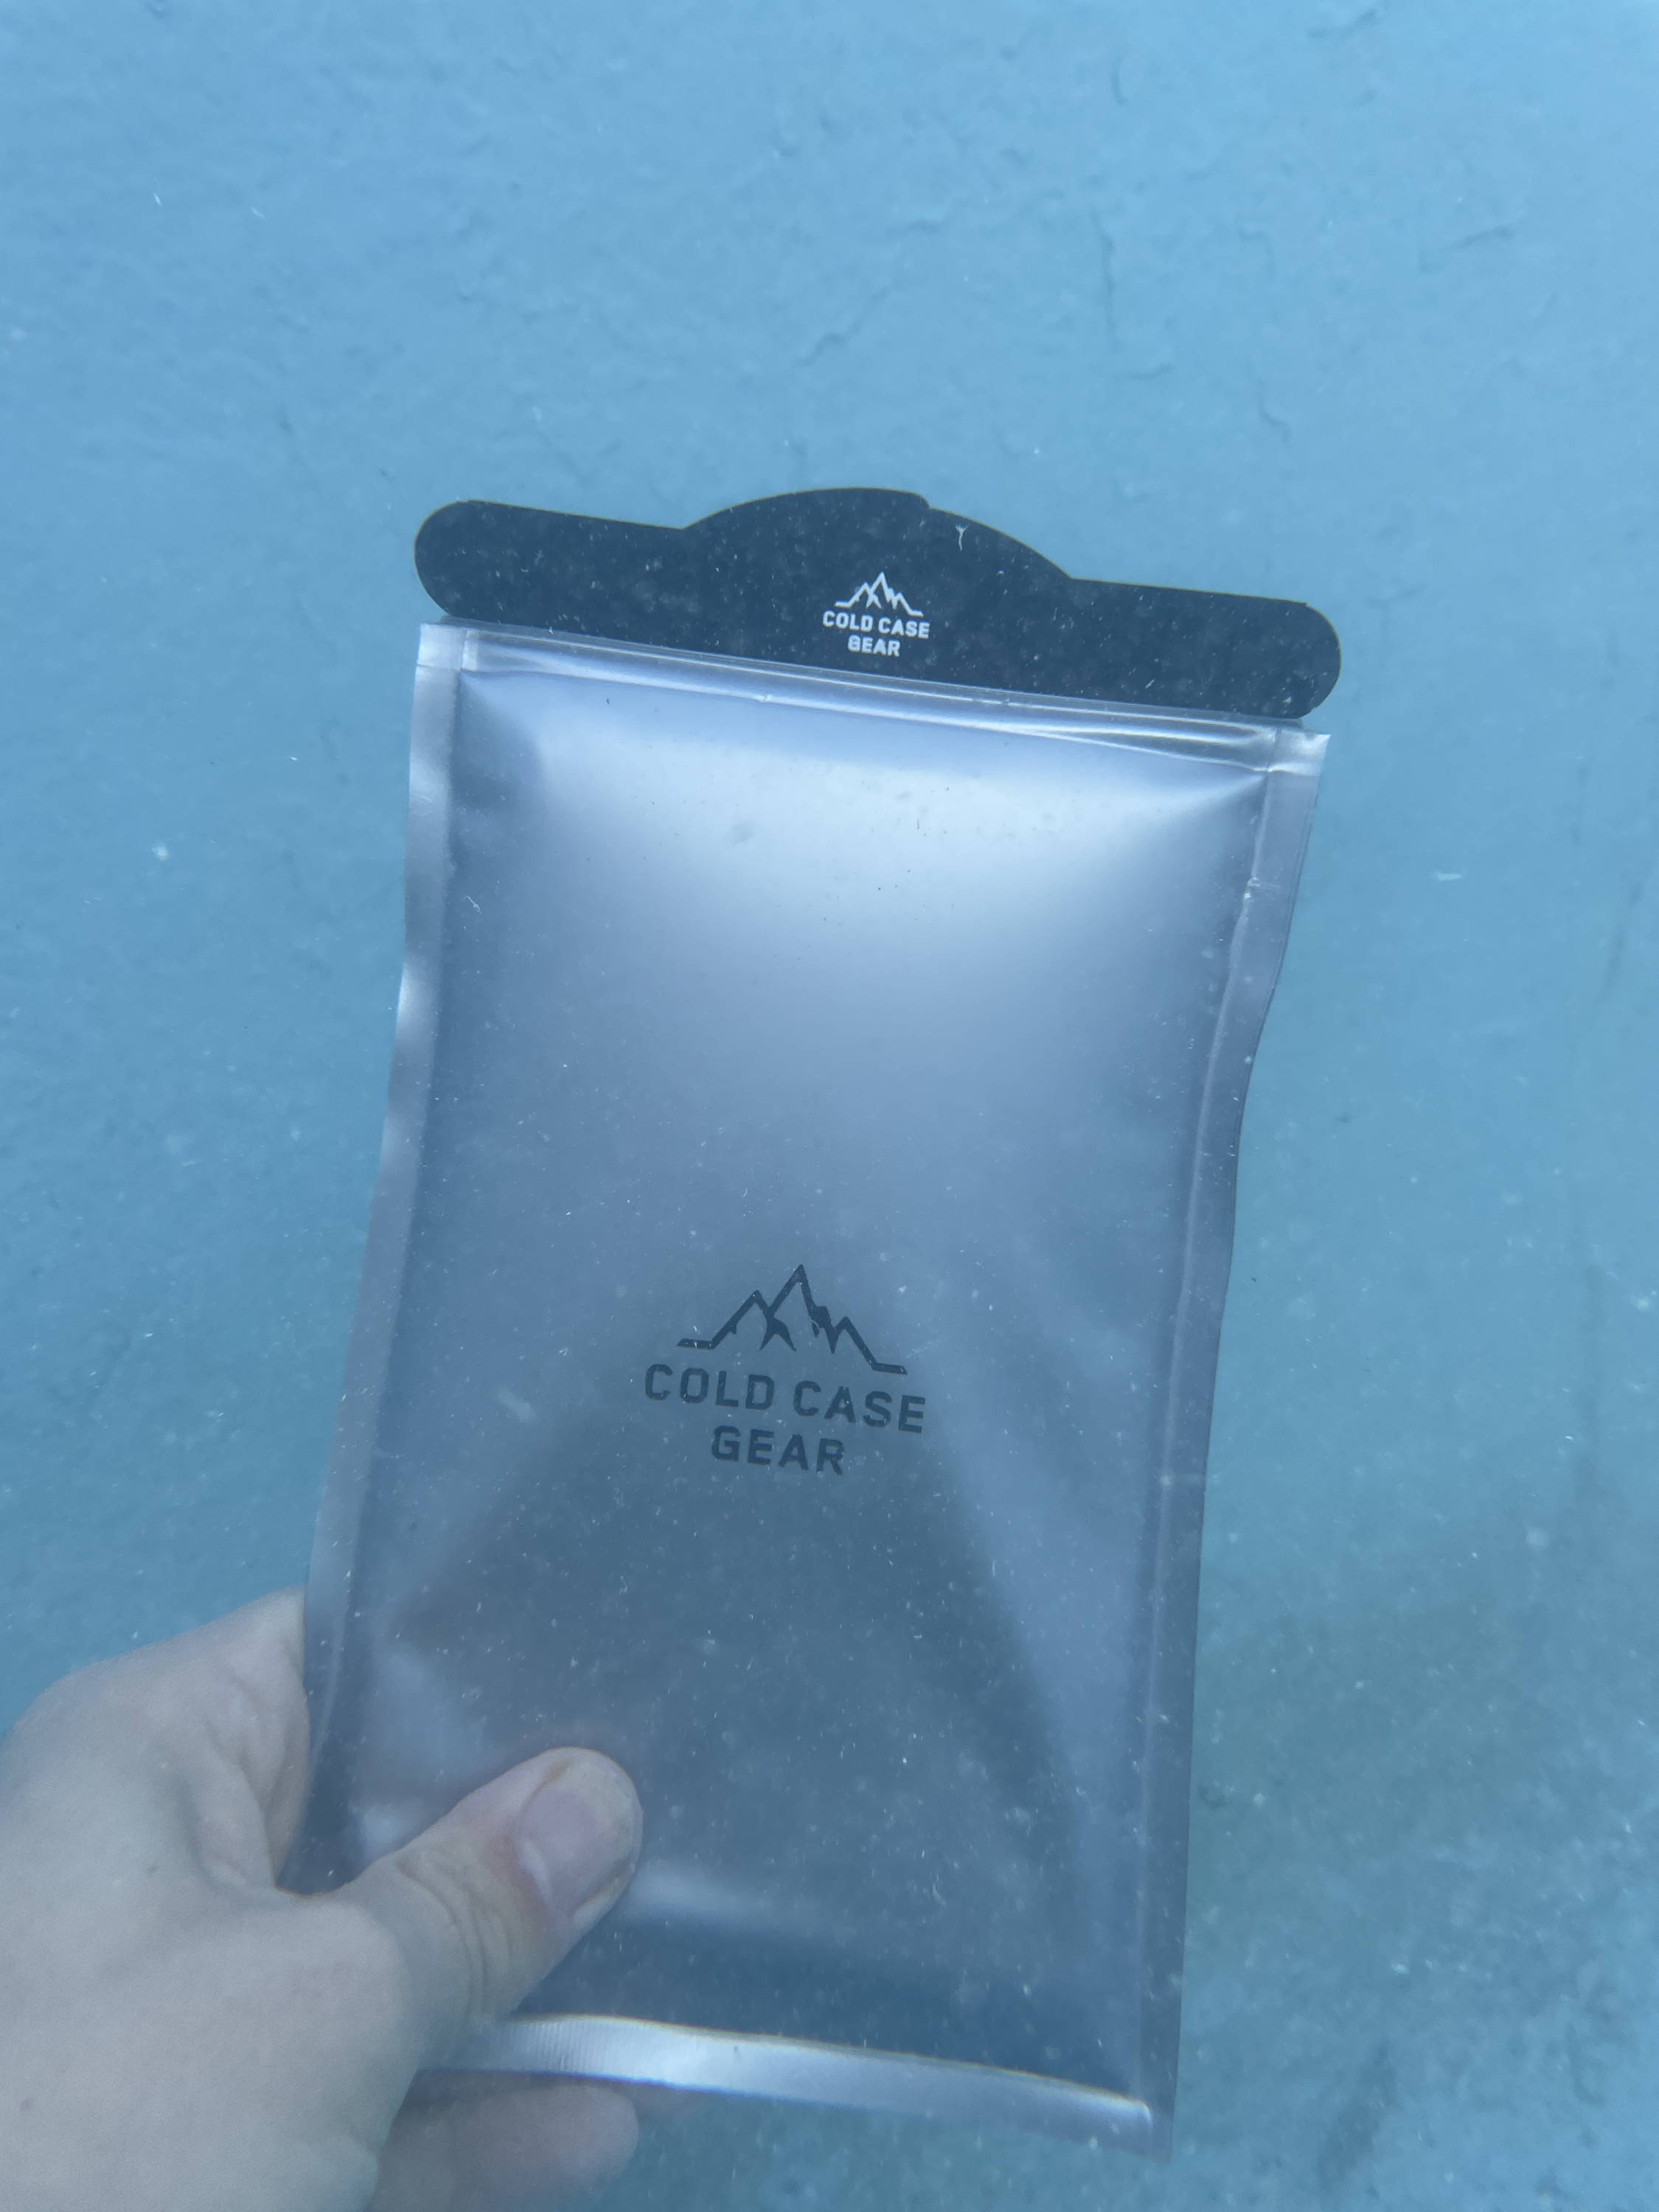 Our waterproof floating phone case is submersible up to six feet